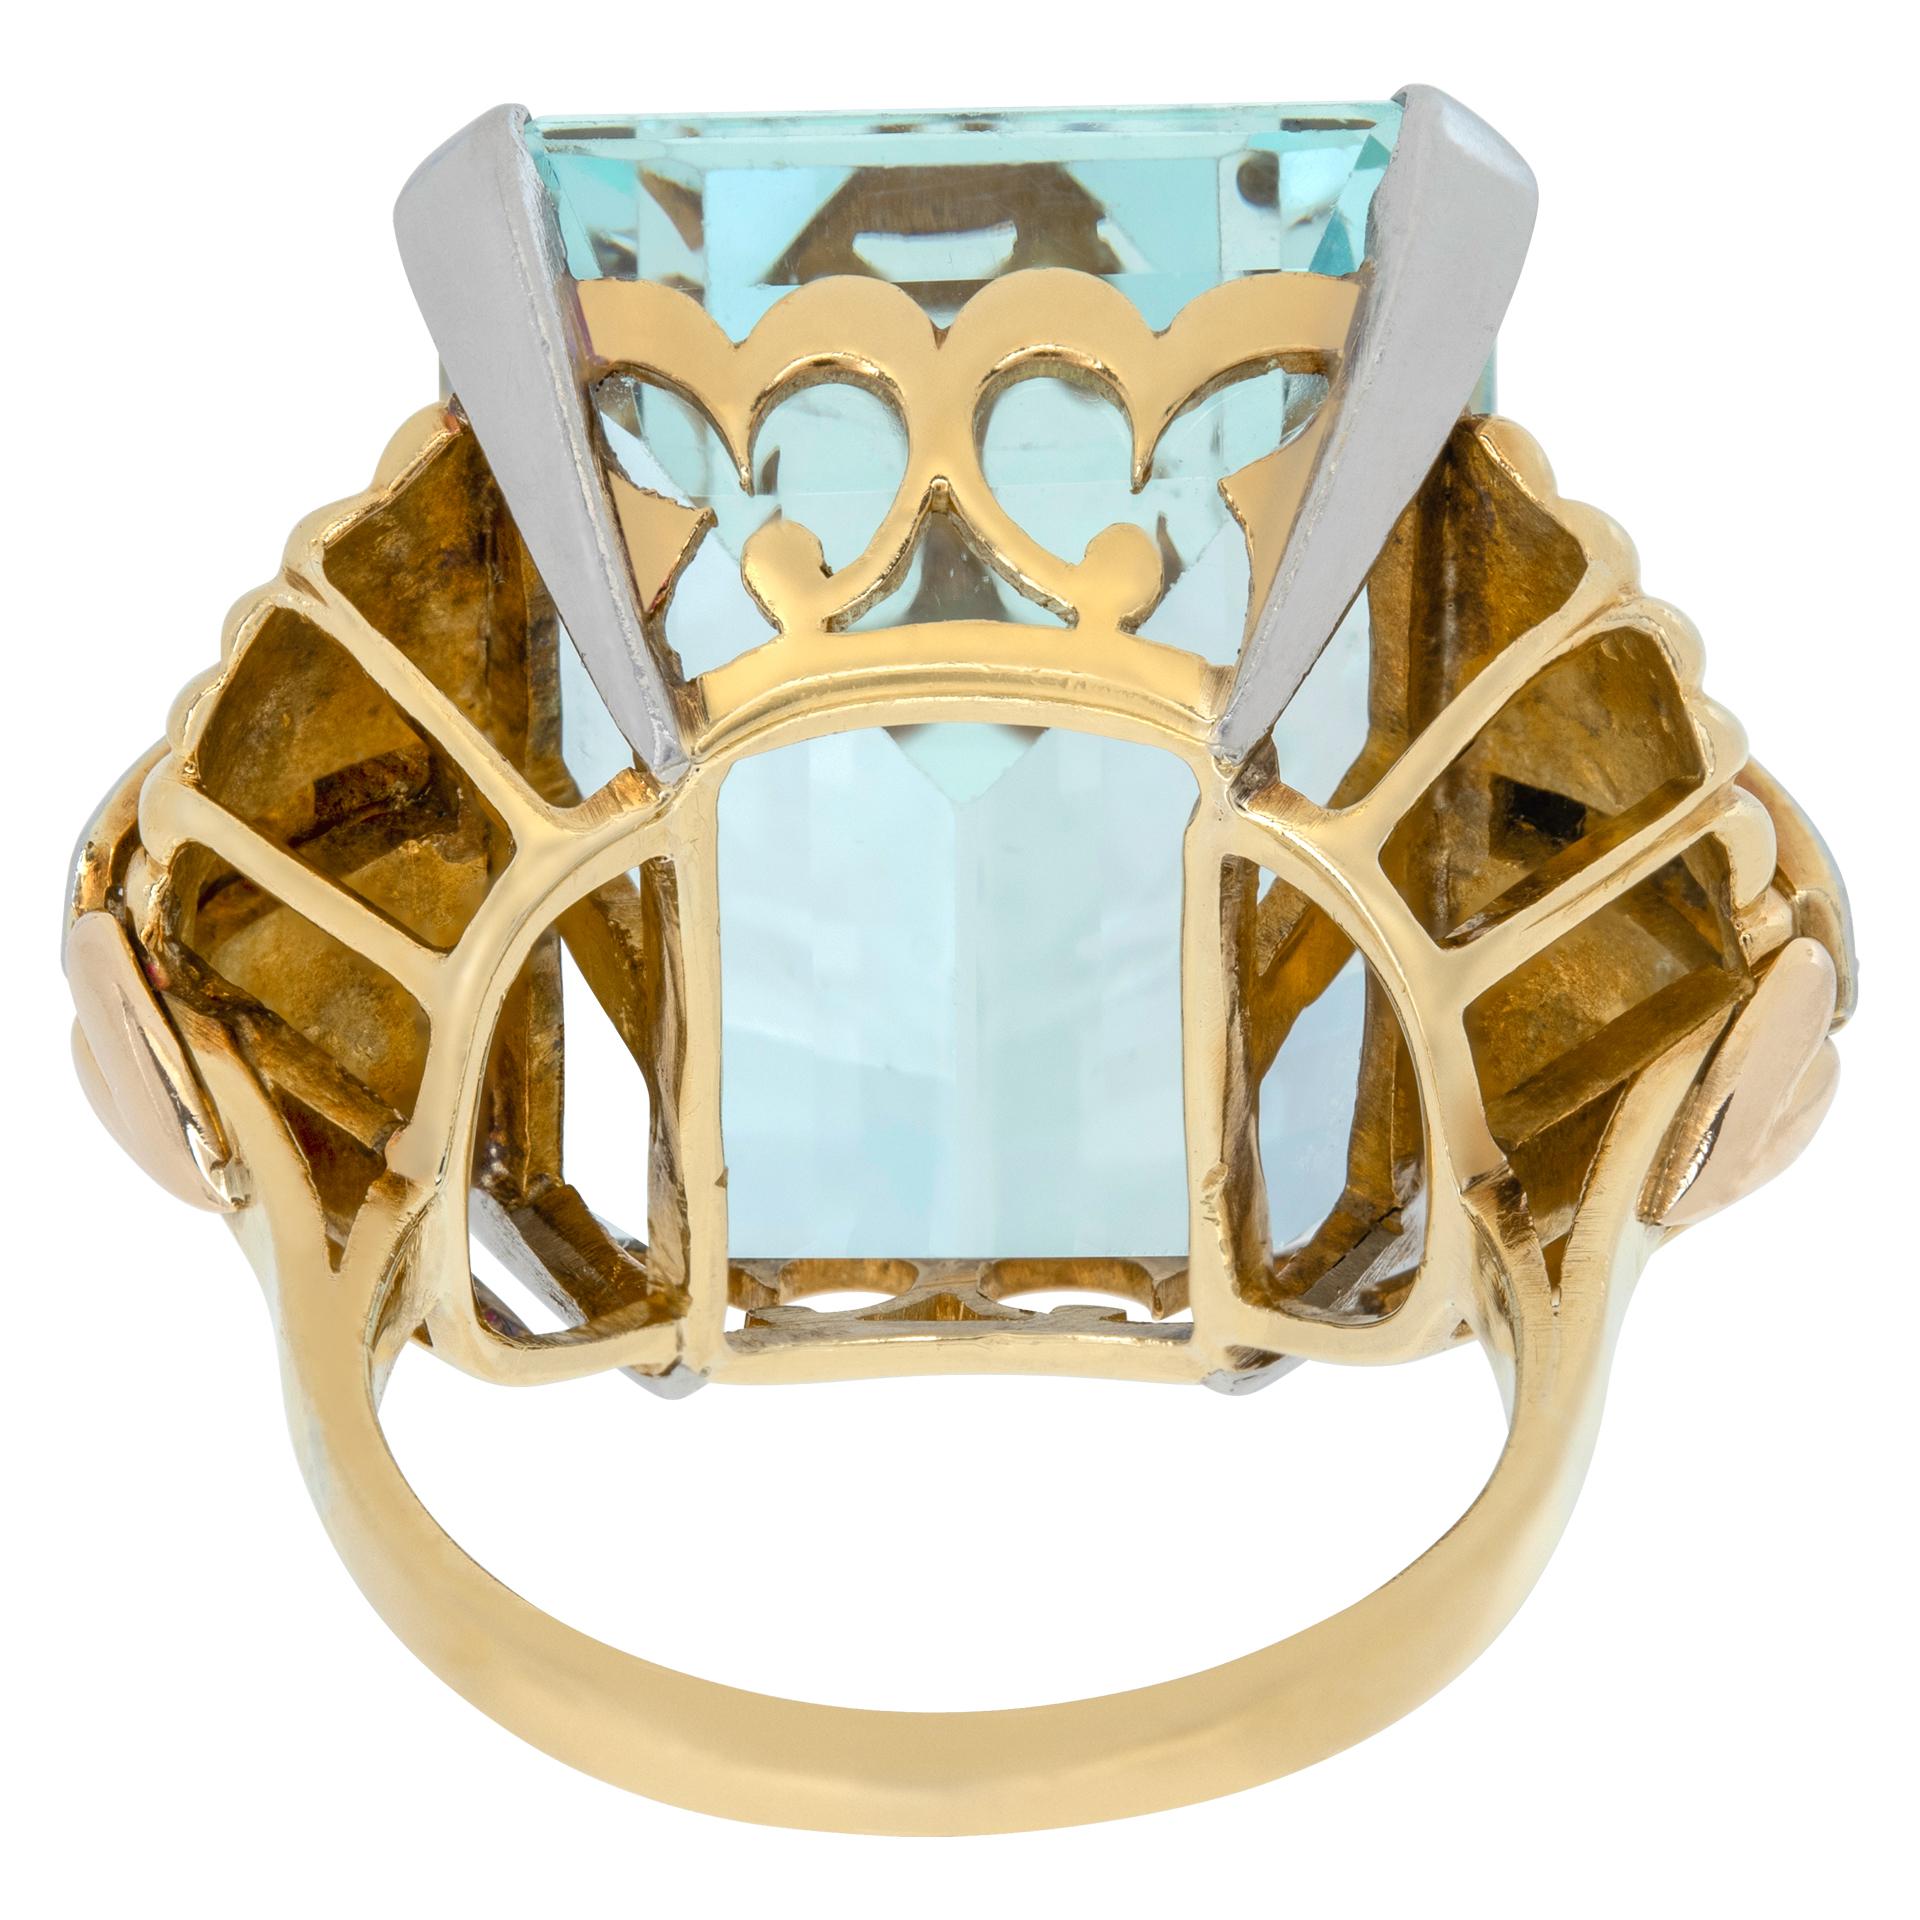 AGL certified Emerald cut Aquamarine approx. 30 carats set in yellow gold ring For Sale 1